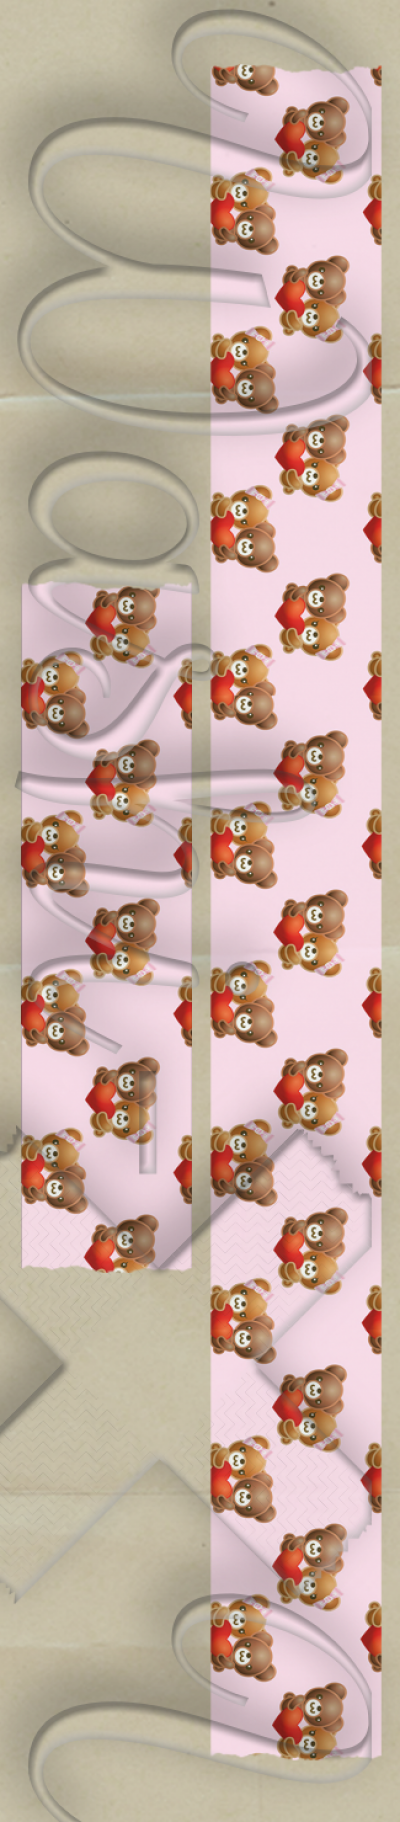 Teddy bears with heart patterned washi tape